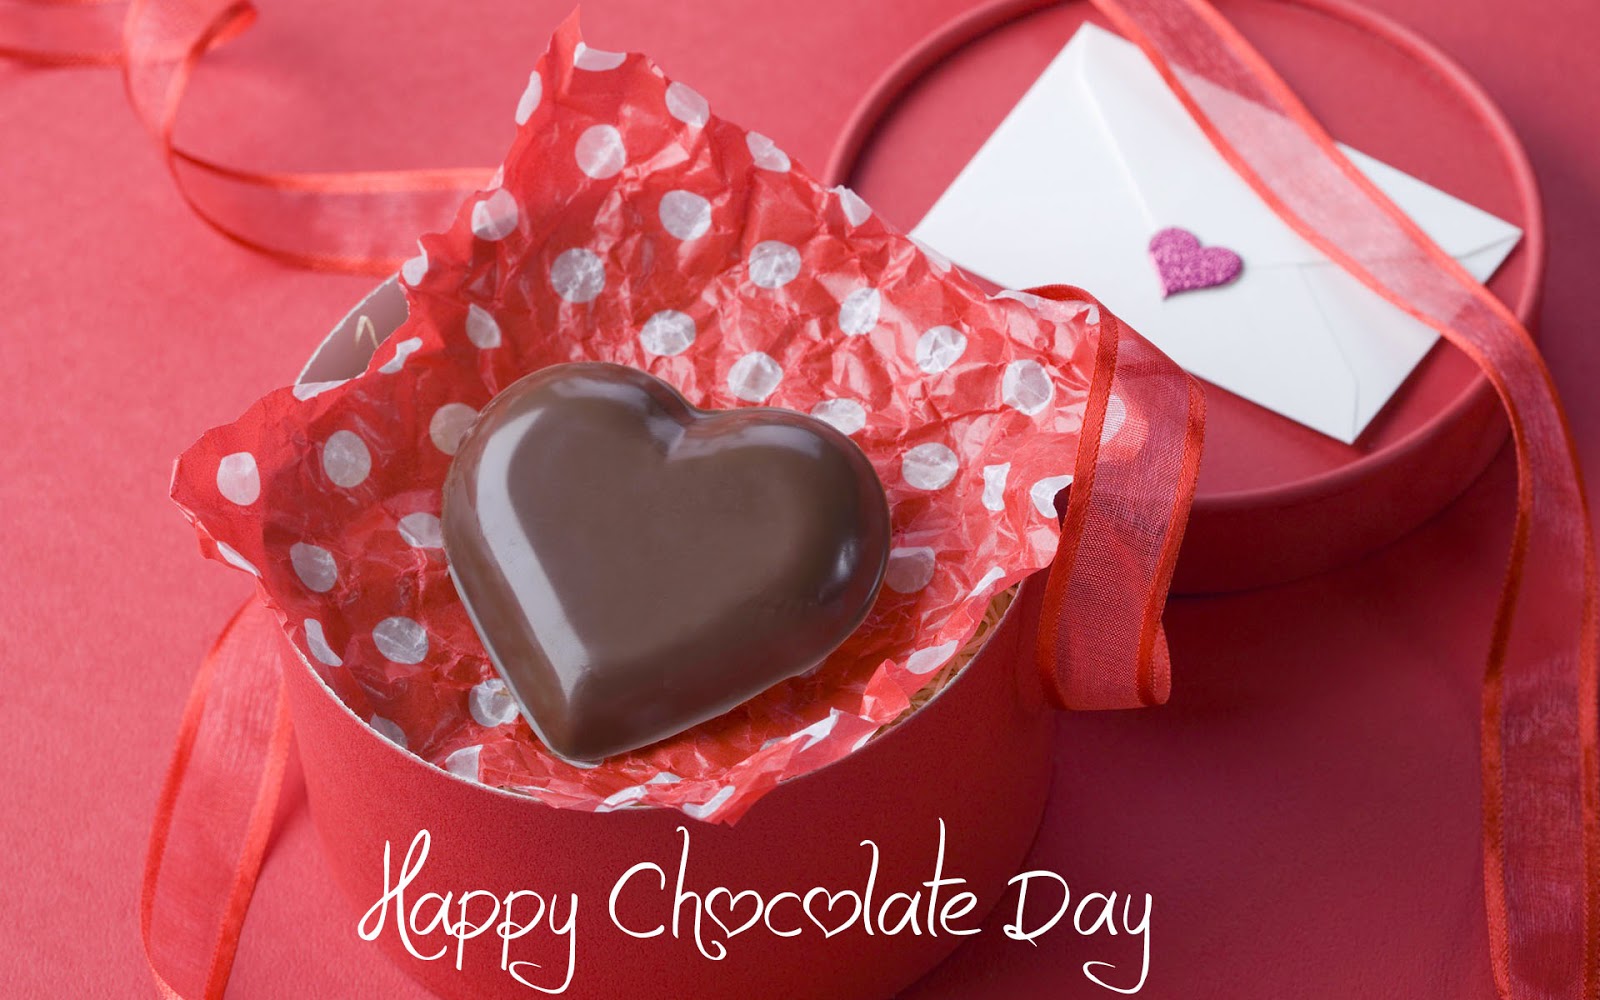 Happy Chocolate Day Wallpapers - Happy Chocolate Day Wishes - HD Wallpaper 